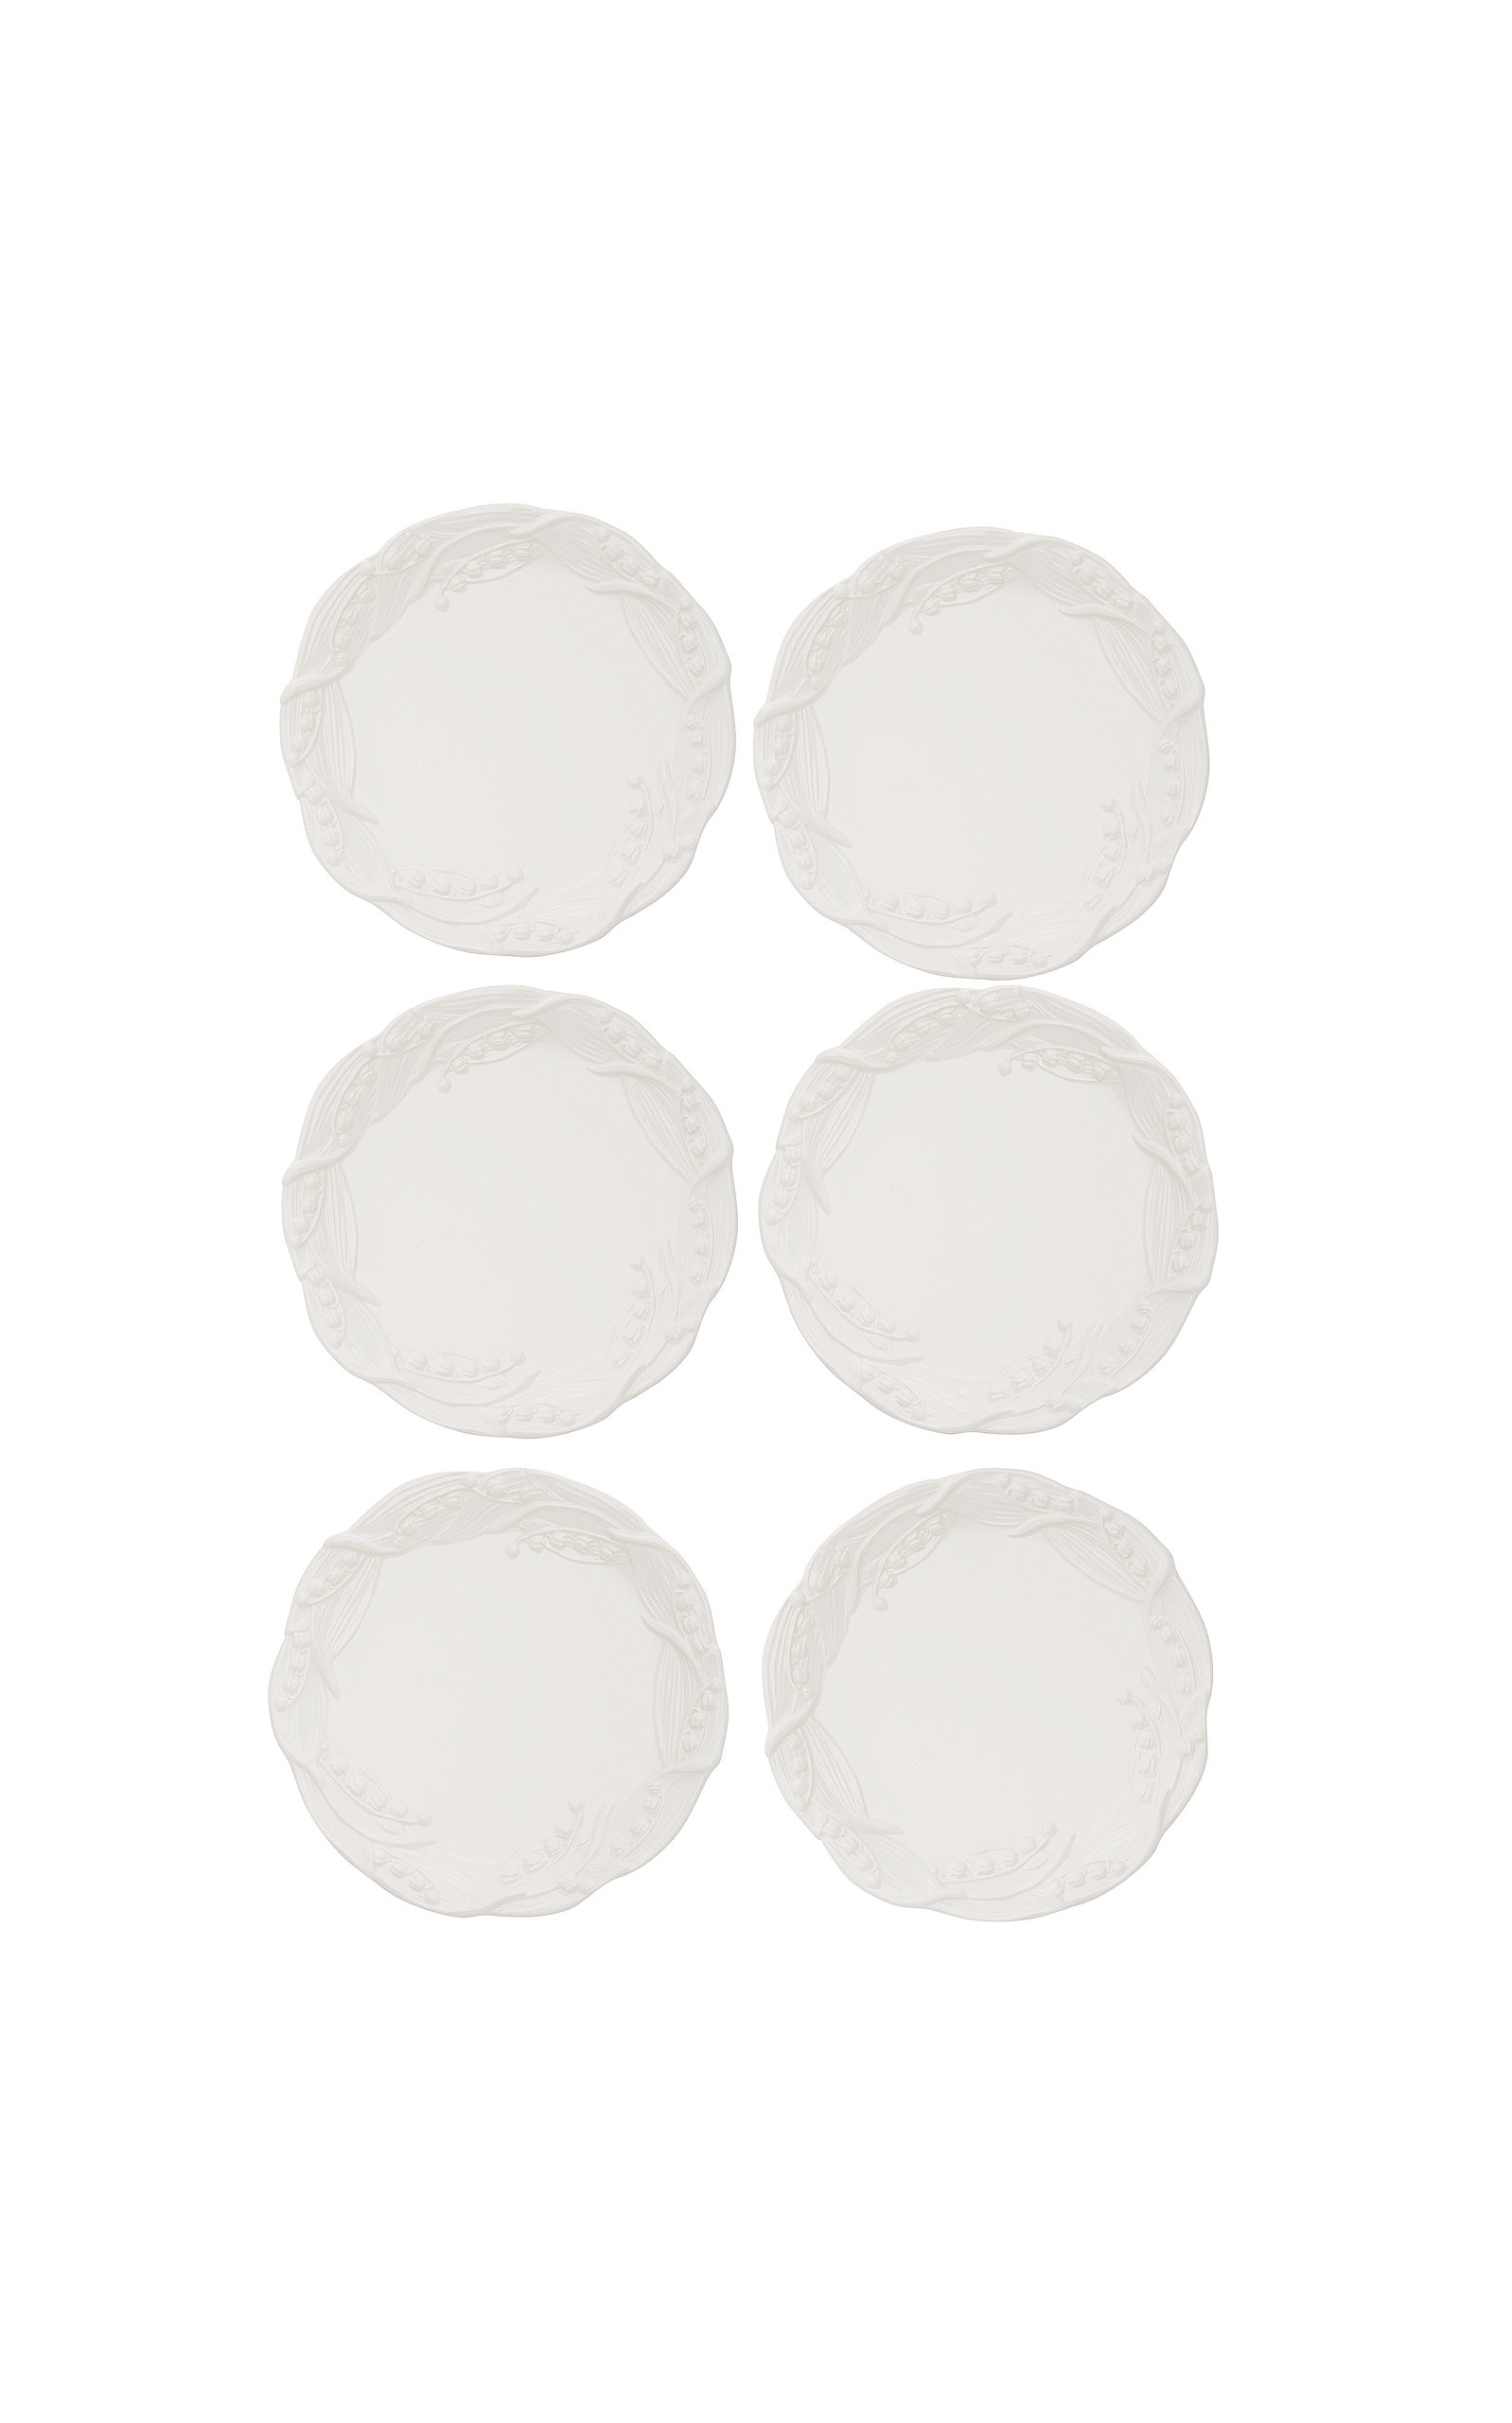 Moda Domus Set Of 6 Lily Of The Valley Ceramic Salad Plates In White